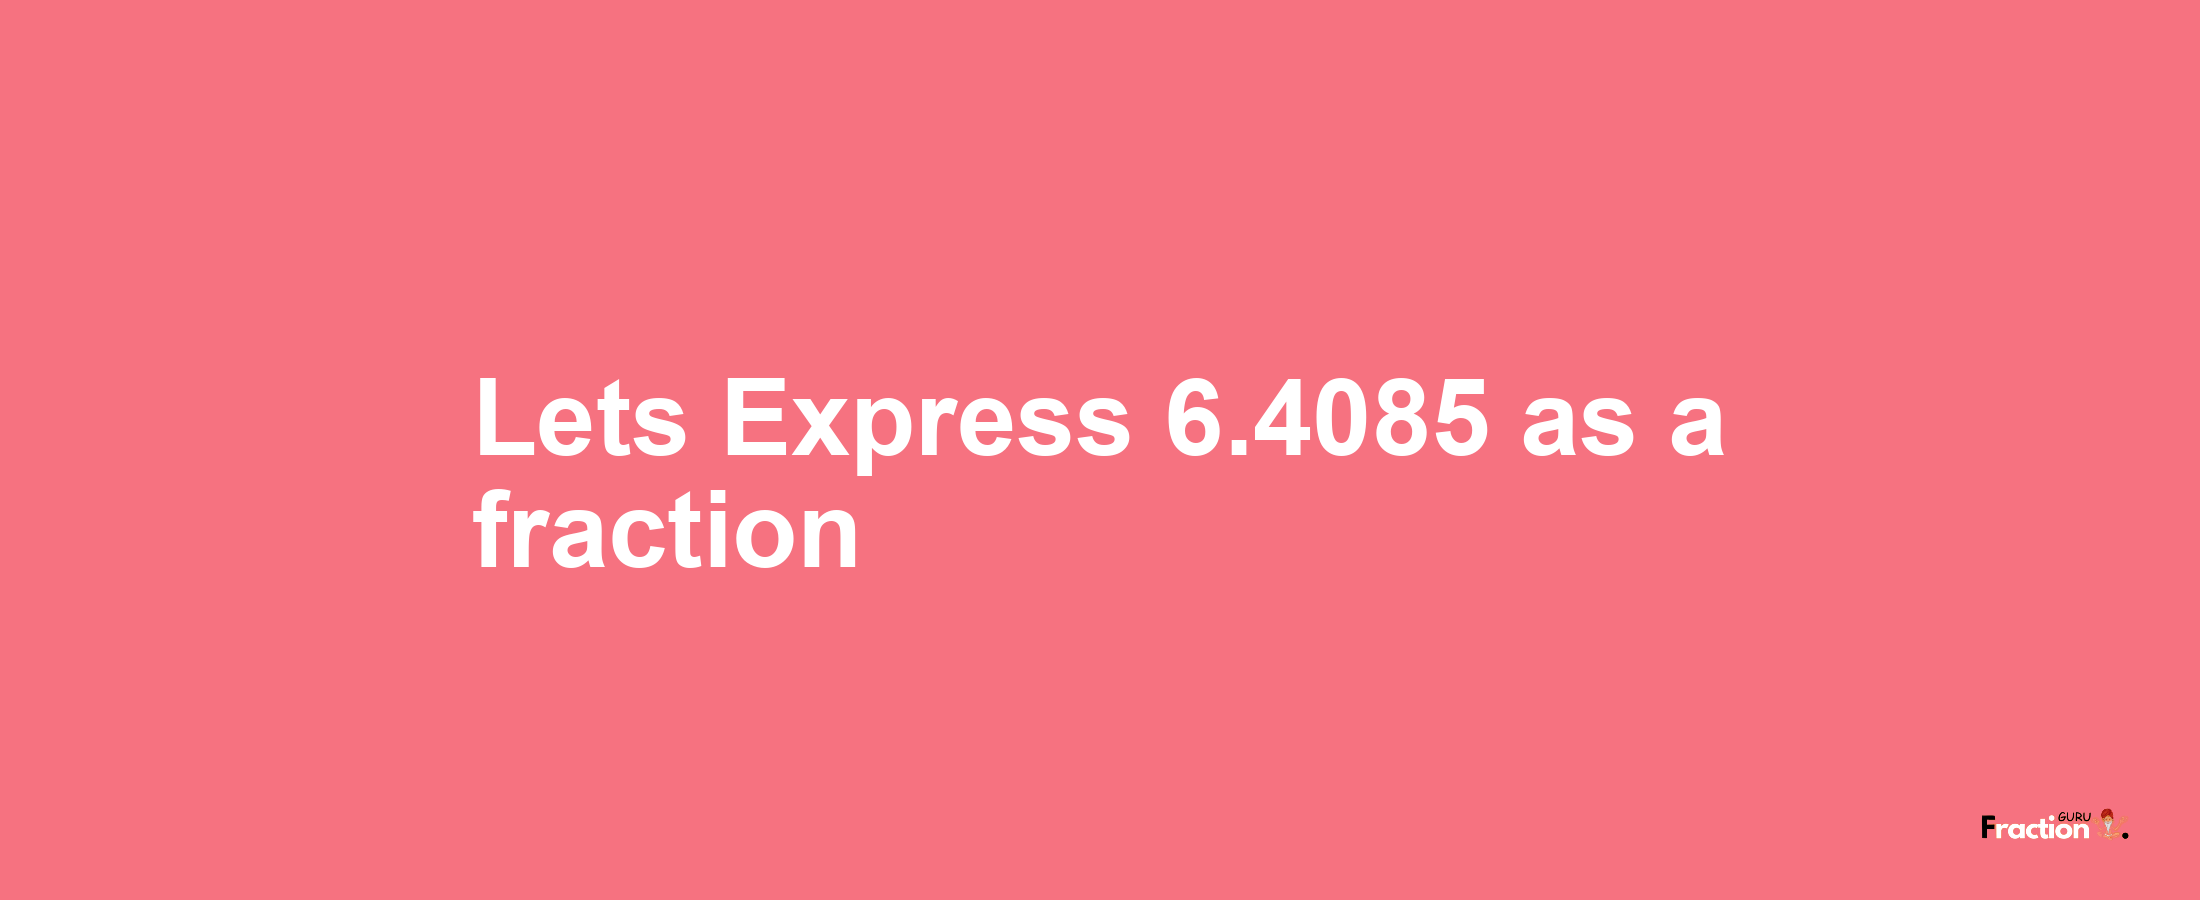 Lets Express 6.4085 as afraction